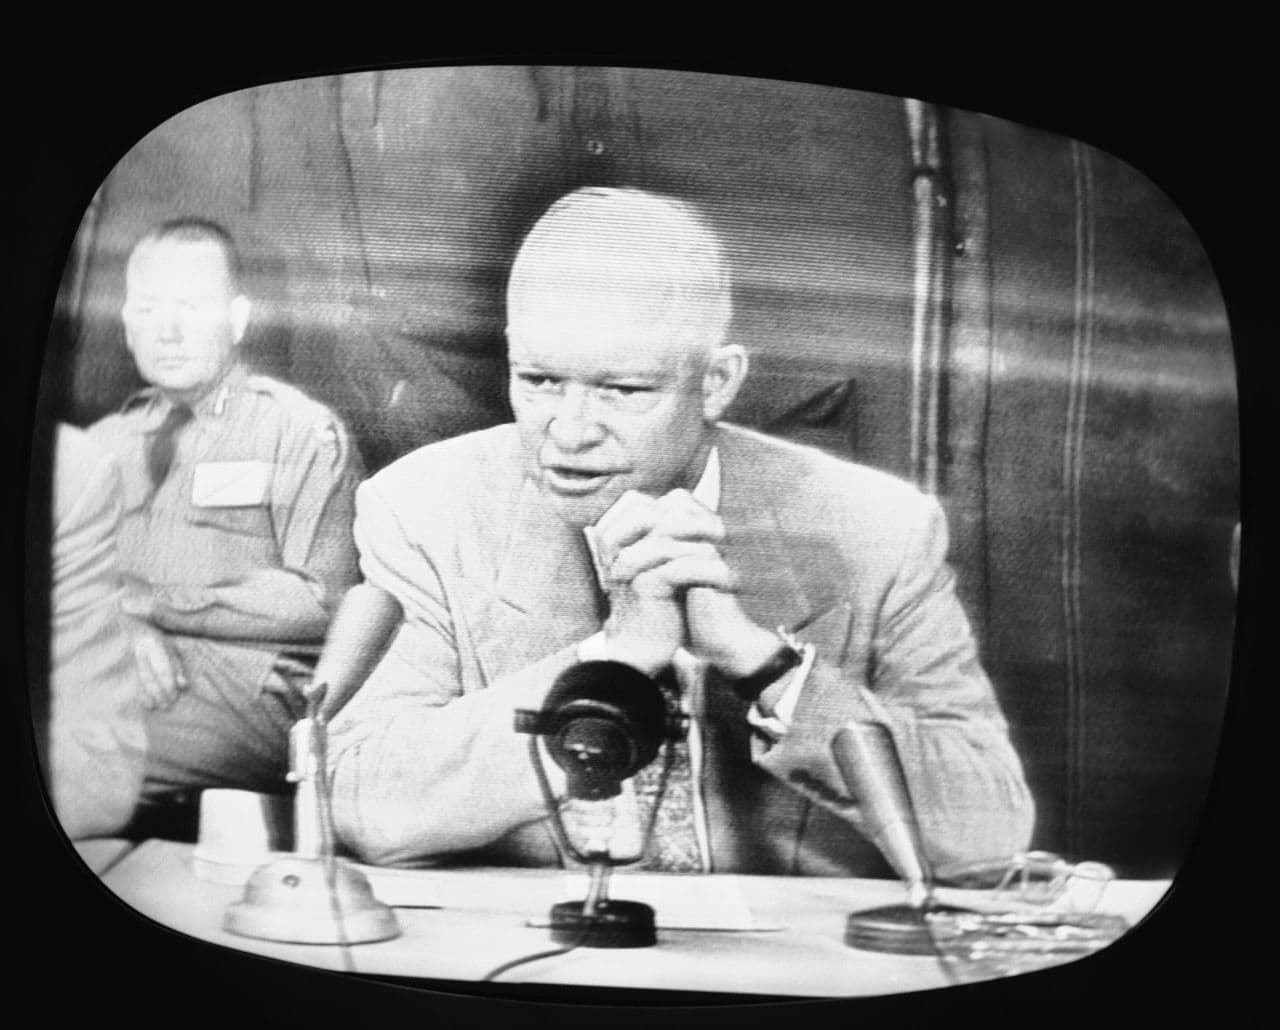 U.S. President Dwight D. Eisenhower, shown on an NBC Television monitor television receiver in New York City, June 15, 1955. (AP)